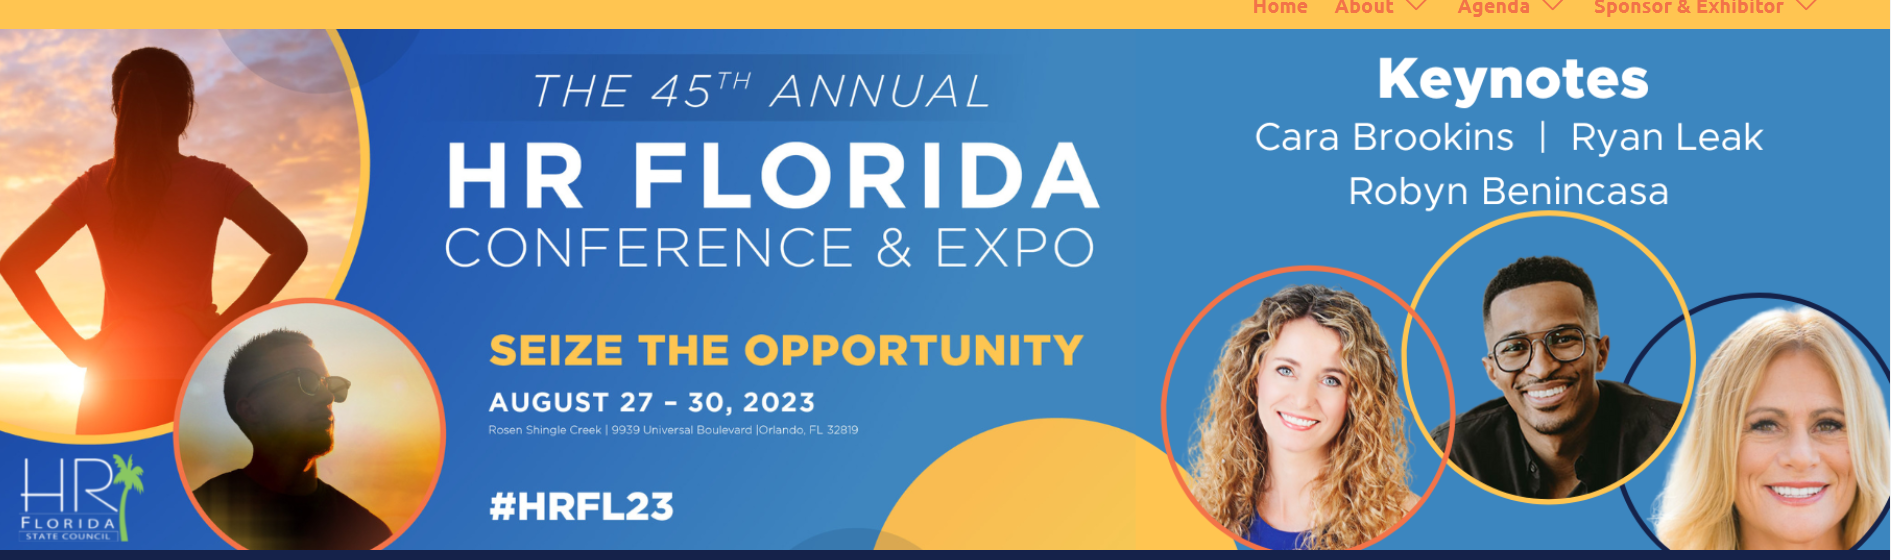 HR florida conference and expo.png